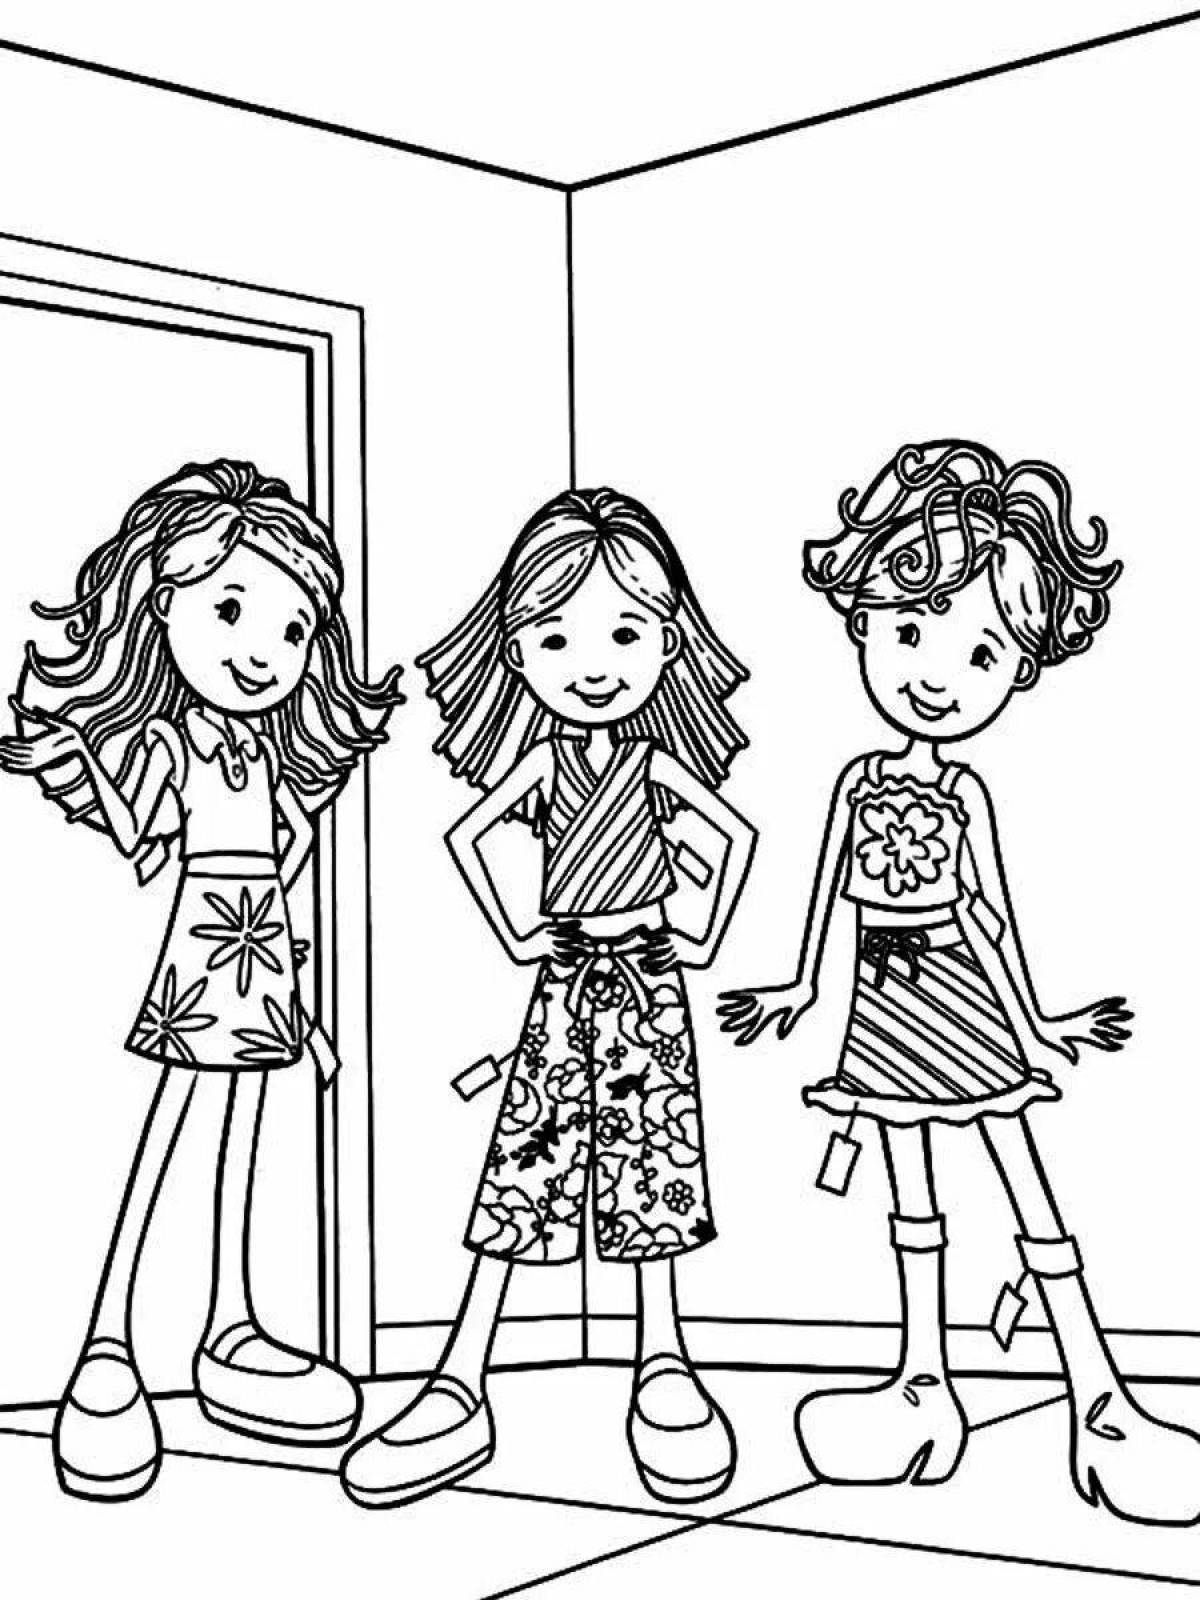 Coloring pages two sisters